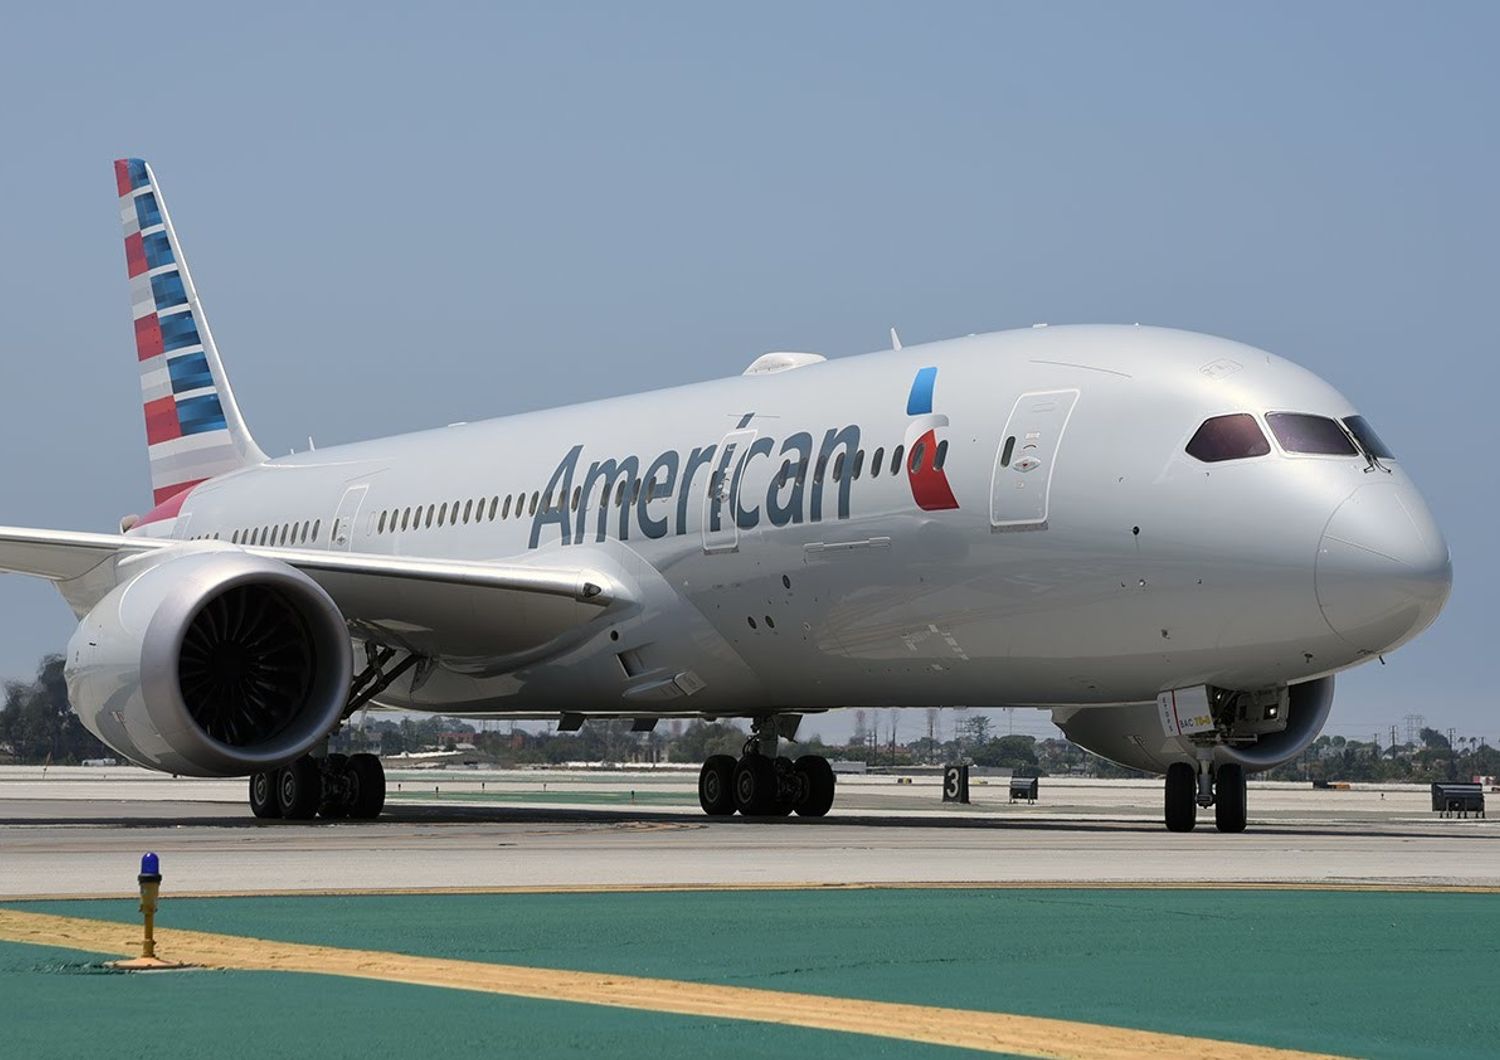 Aereo American Airlines boeing 787